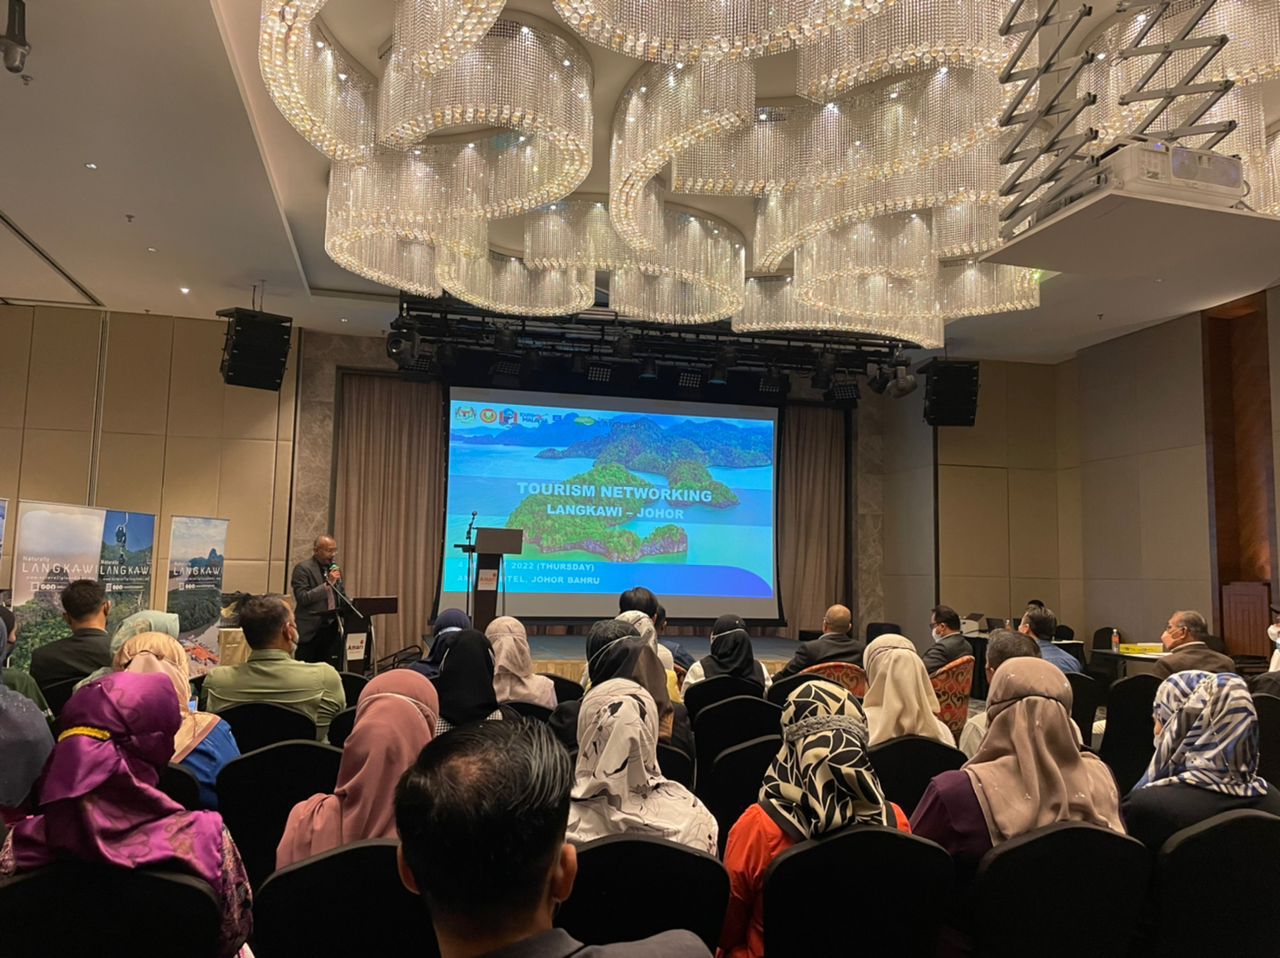 Langkawi Development Authority (LADA) Tourism Networking event